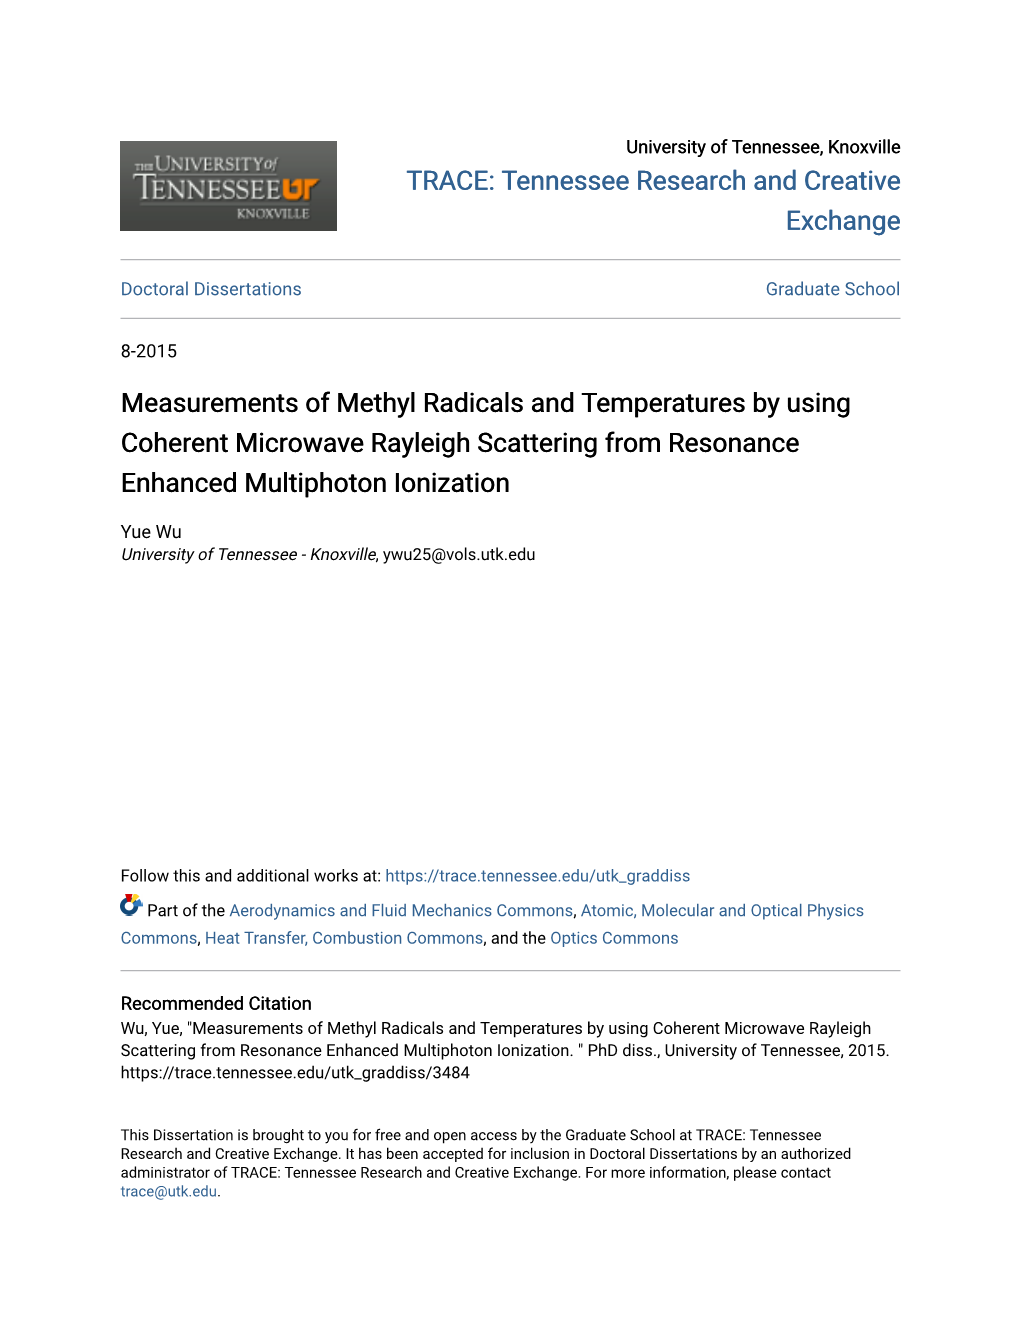 Measurements of Methyl Radicals and Temperatures by Using Coherent Microwave Rayleigh Scattering from Resonance Enhanced Multiphoton Ionization